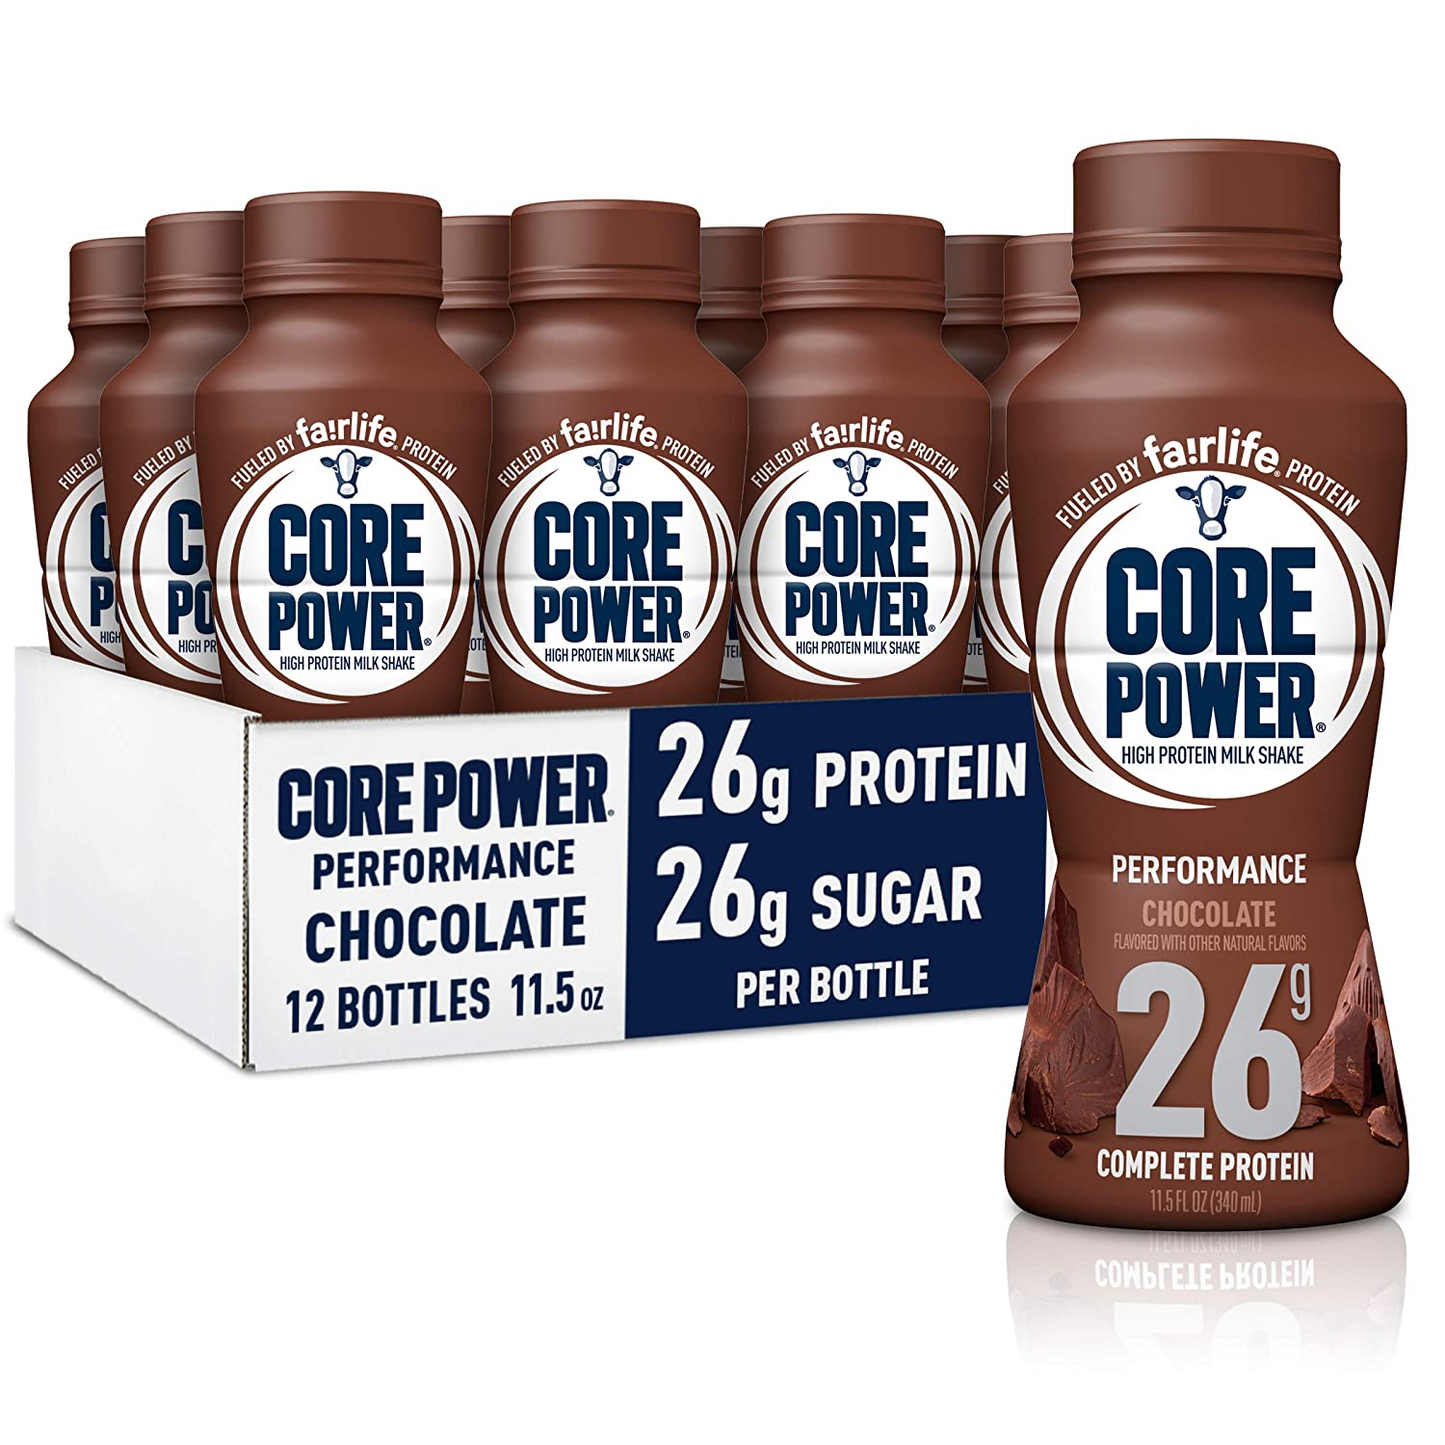 Core Power Protein Shakes (26G), Chocolate, No Artificial Sweeteners, Ready to Drink for Workout Recovery, 11.5 Fl Oz (Pack of 12) (Packaging May Vary)